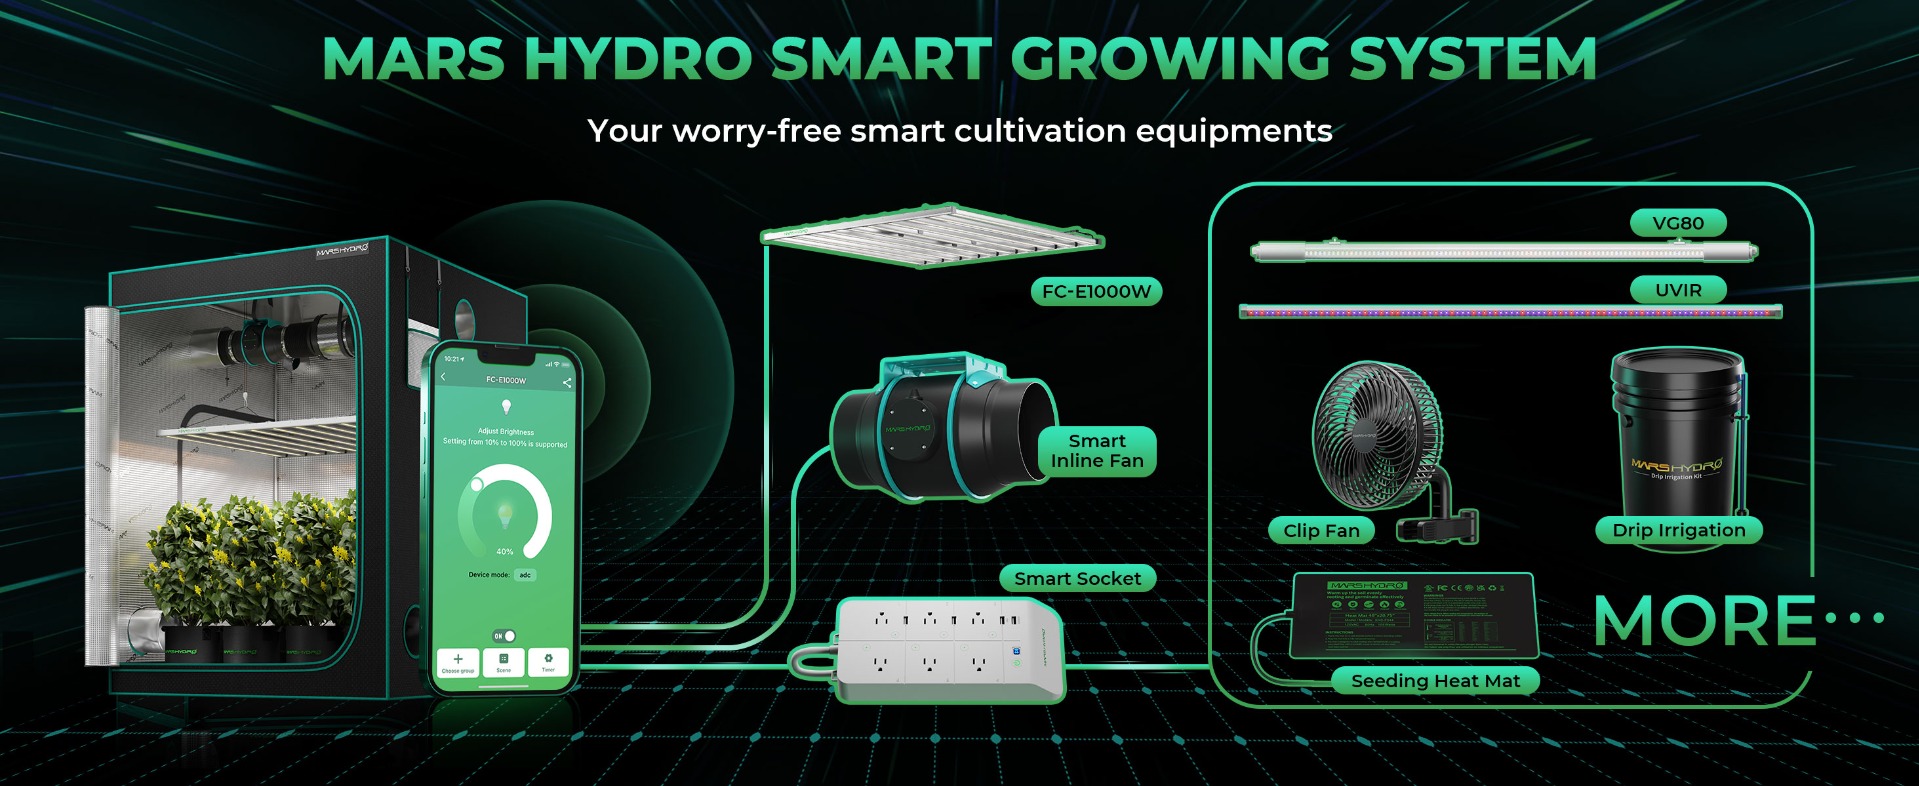 mars hydro smart growing system with fc-e1000w led grow light